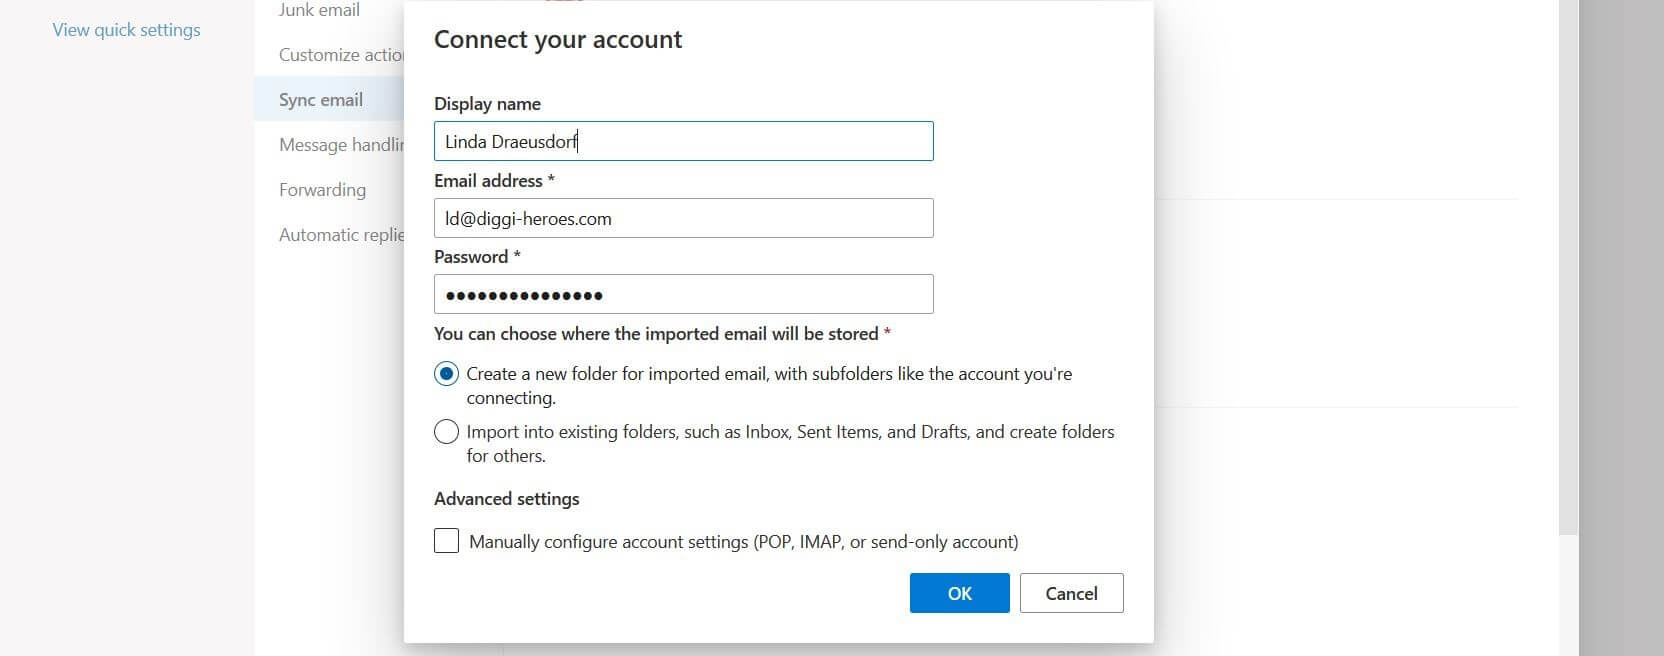 Dialog box for connecting accounts in Outlook on the web